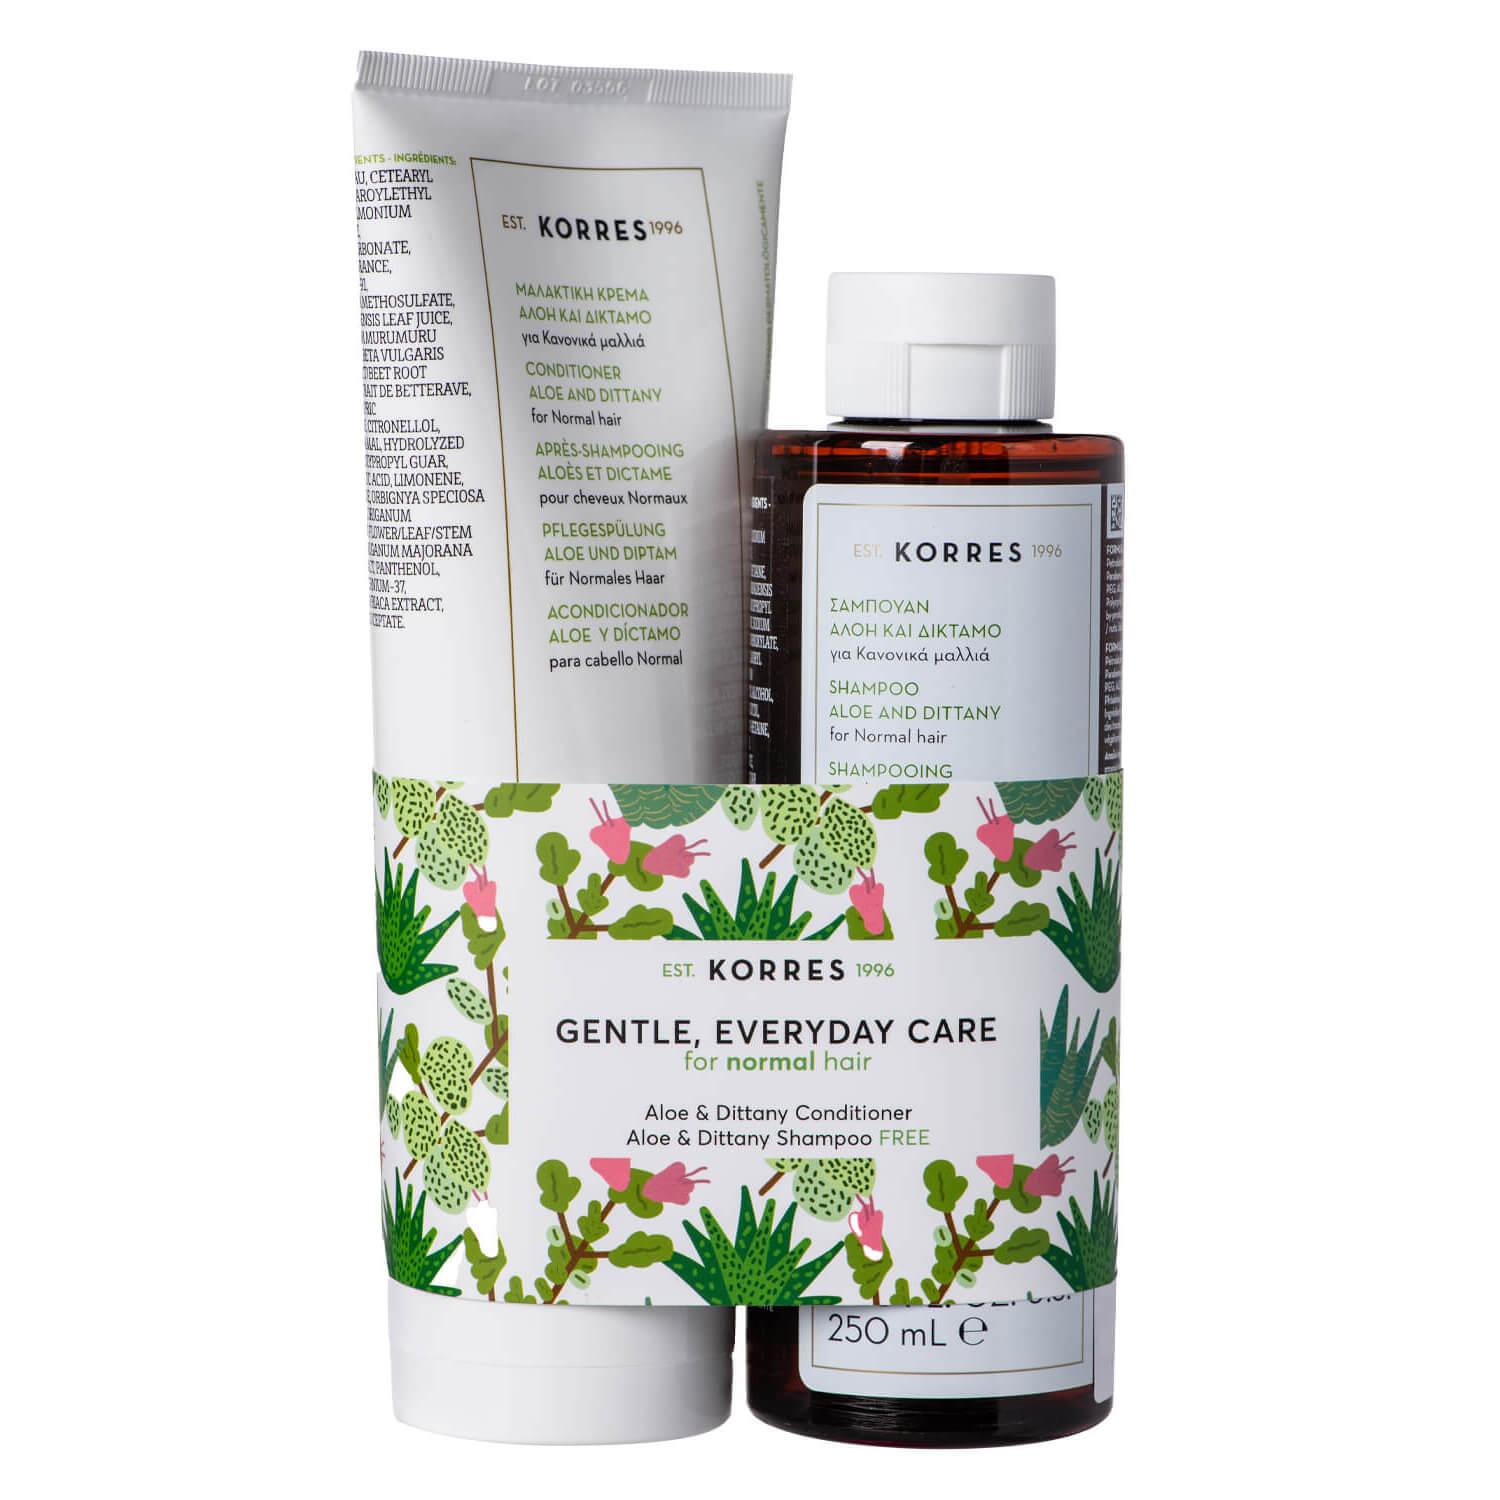 Korres Haircare - Aloe & Dittany Kit de soins capillaires